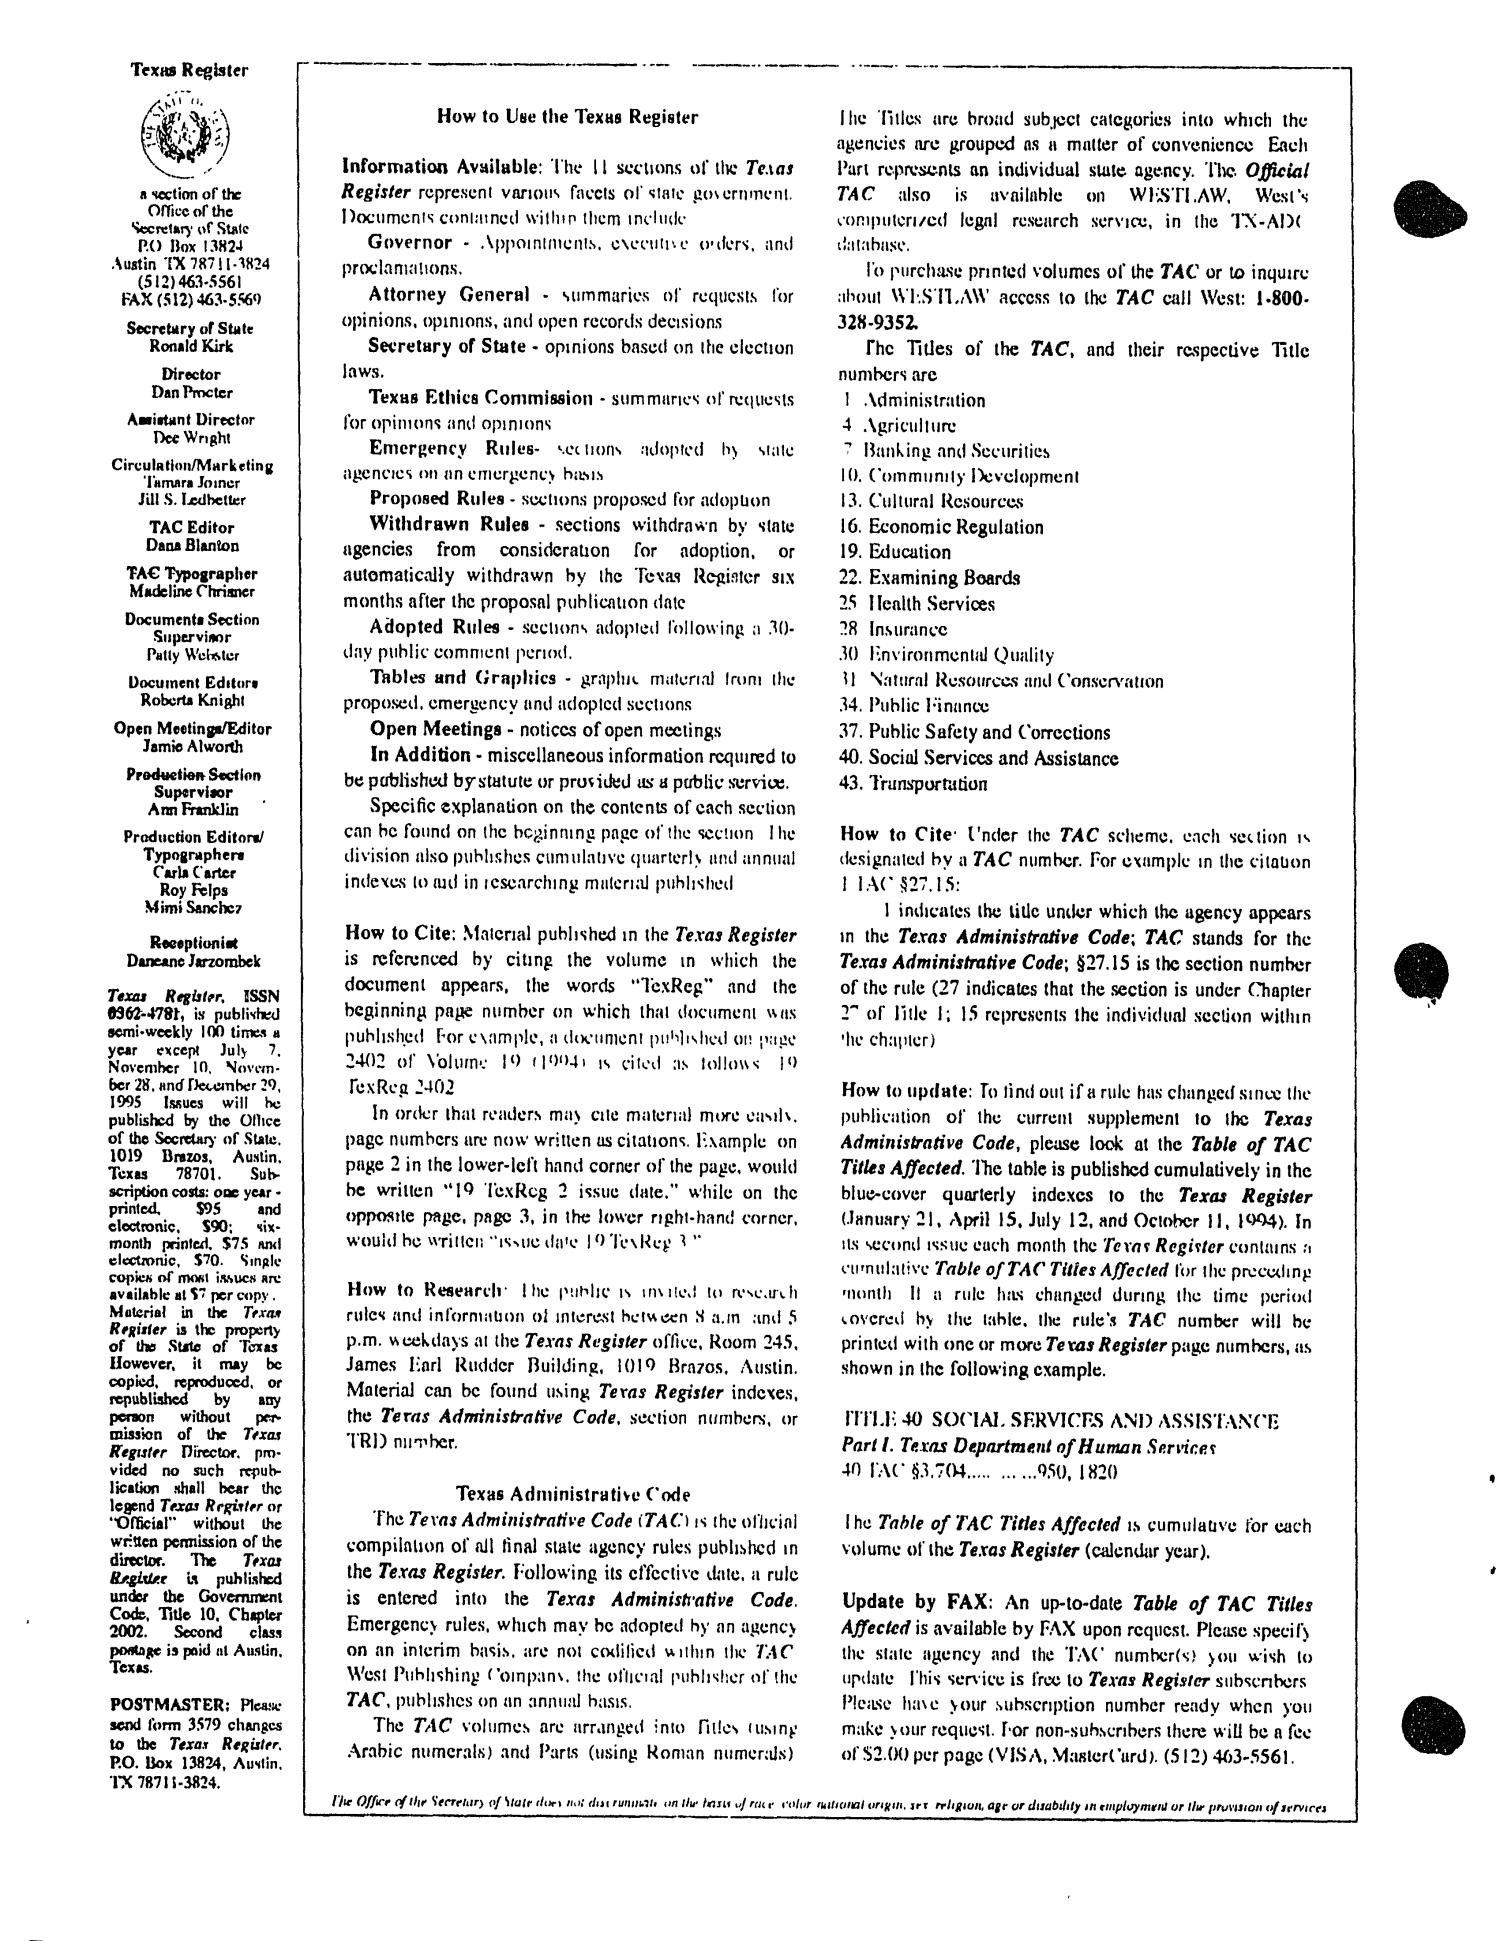 Texas Register, Volume 20, Number 5, Pages 261-305, January 17, 1995
                                                
                                                    None
                                                